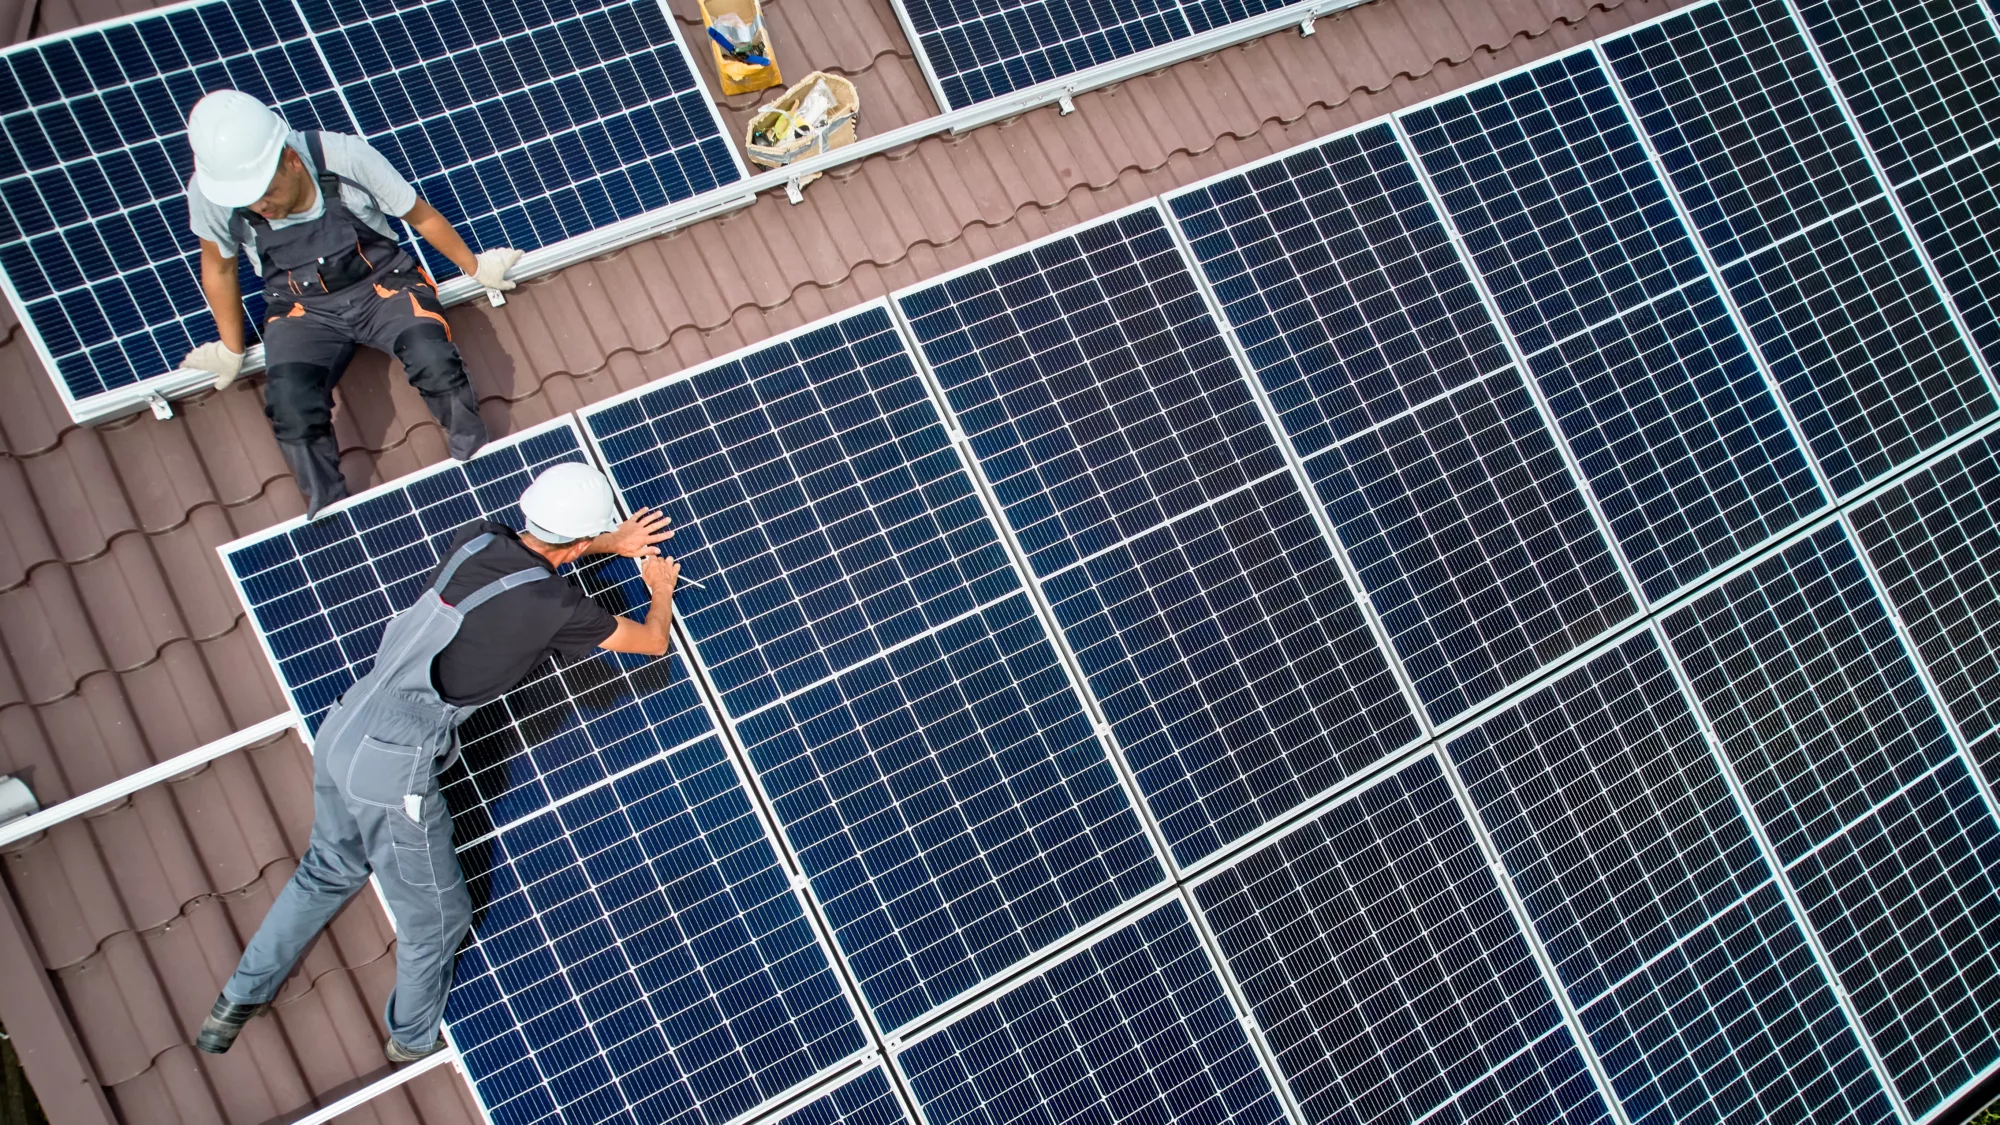 To receive tax credits among the other incentives, homeowners must get a solar installation in the United States